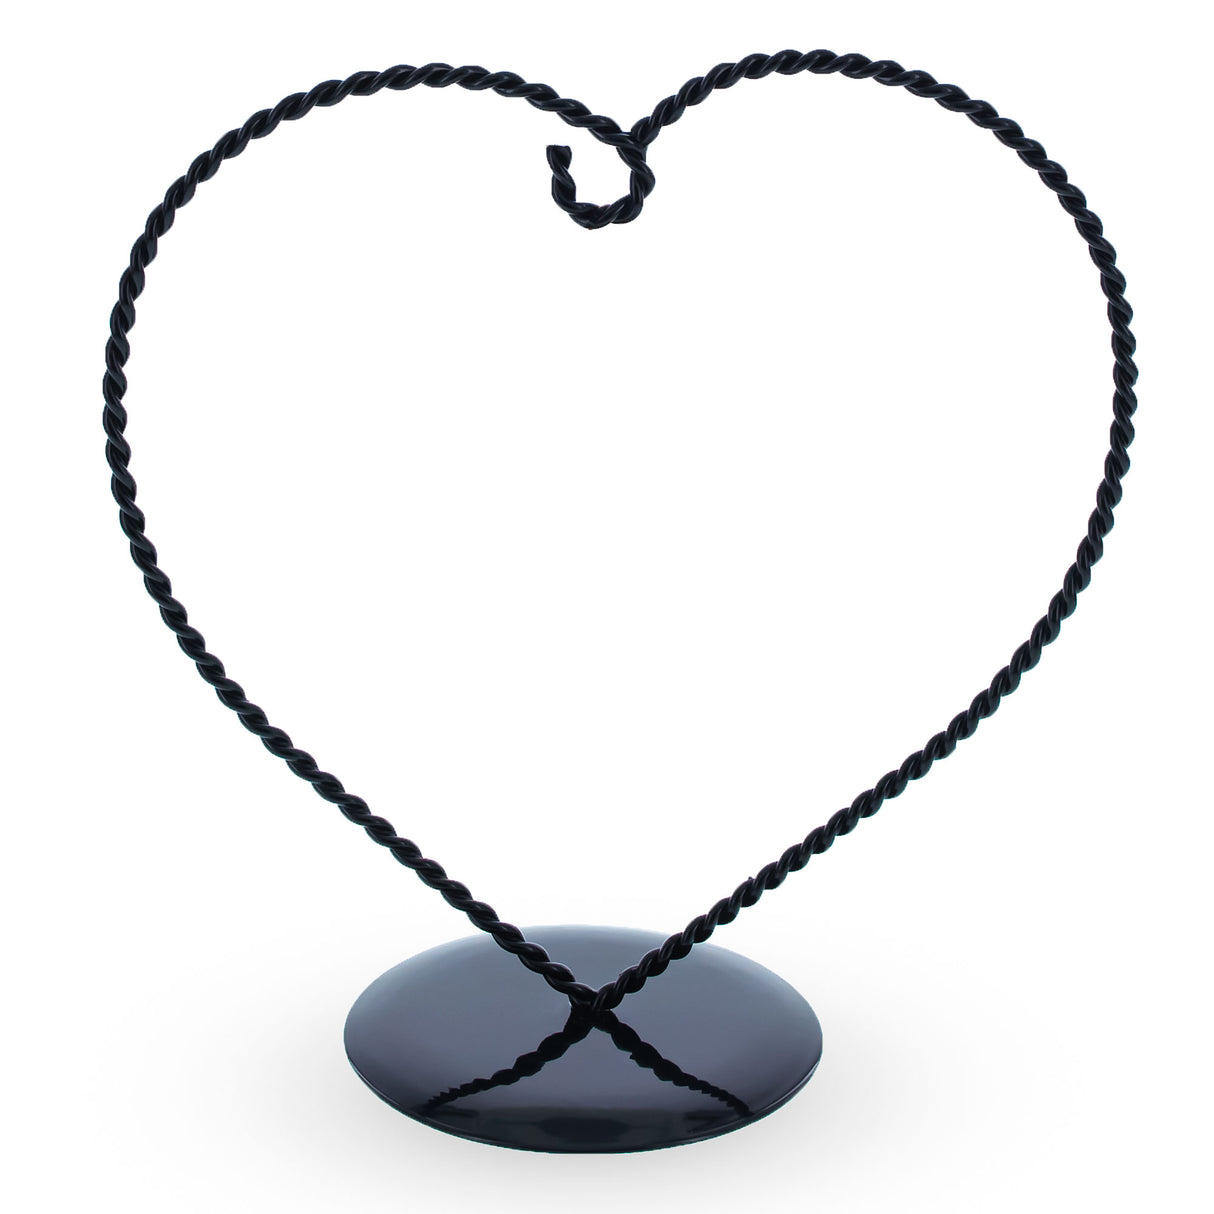 Metal Heart Shape Black Metal Solid Round Base Ornament Display Stand 7 Inches in Black color